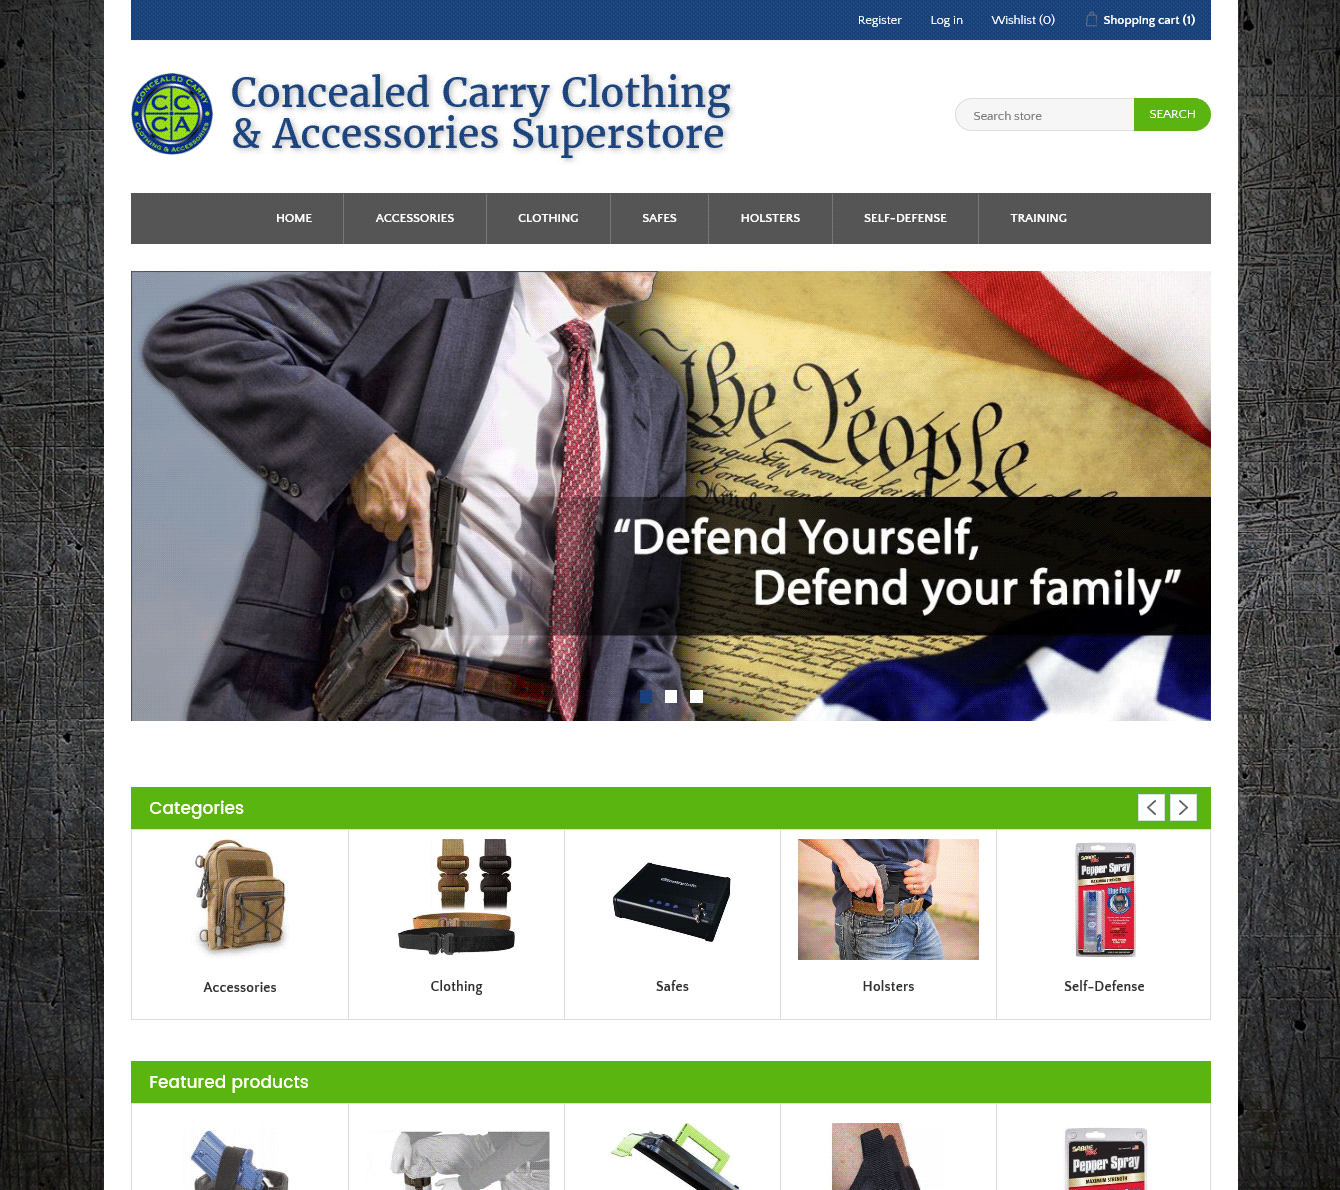 Concealed Carry Clothing & Accessories